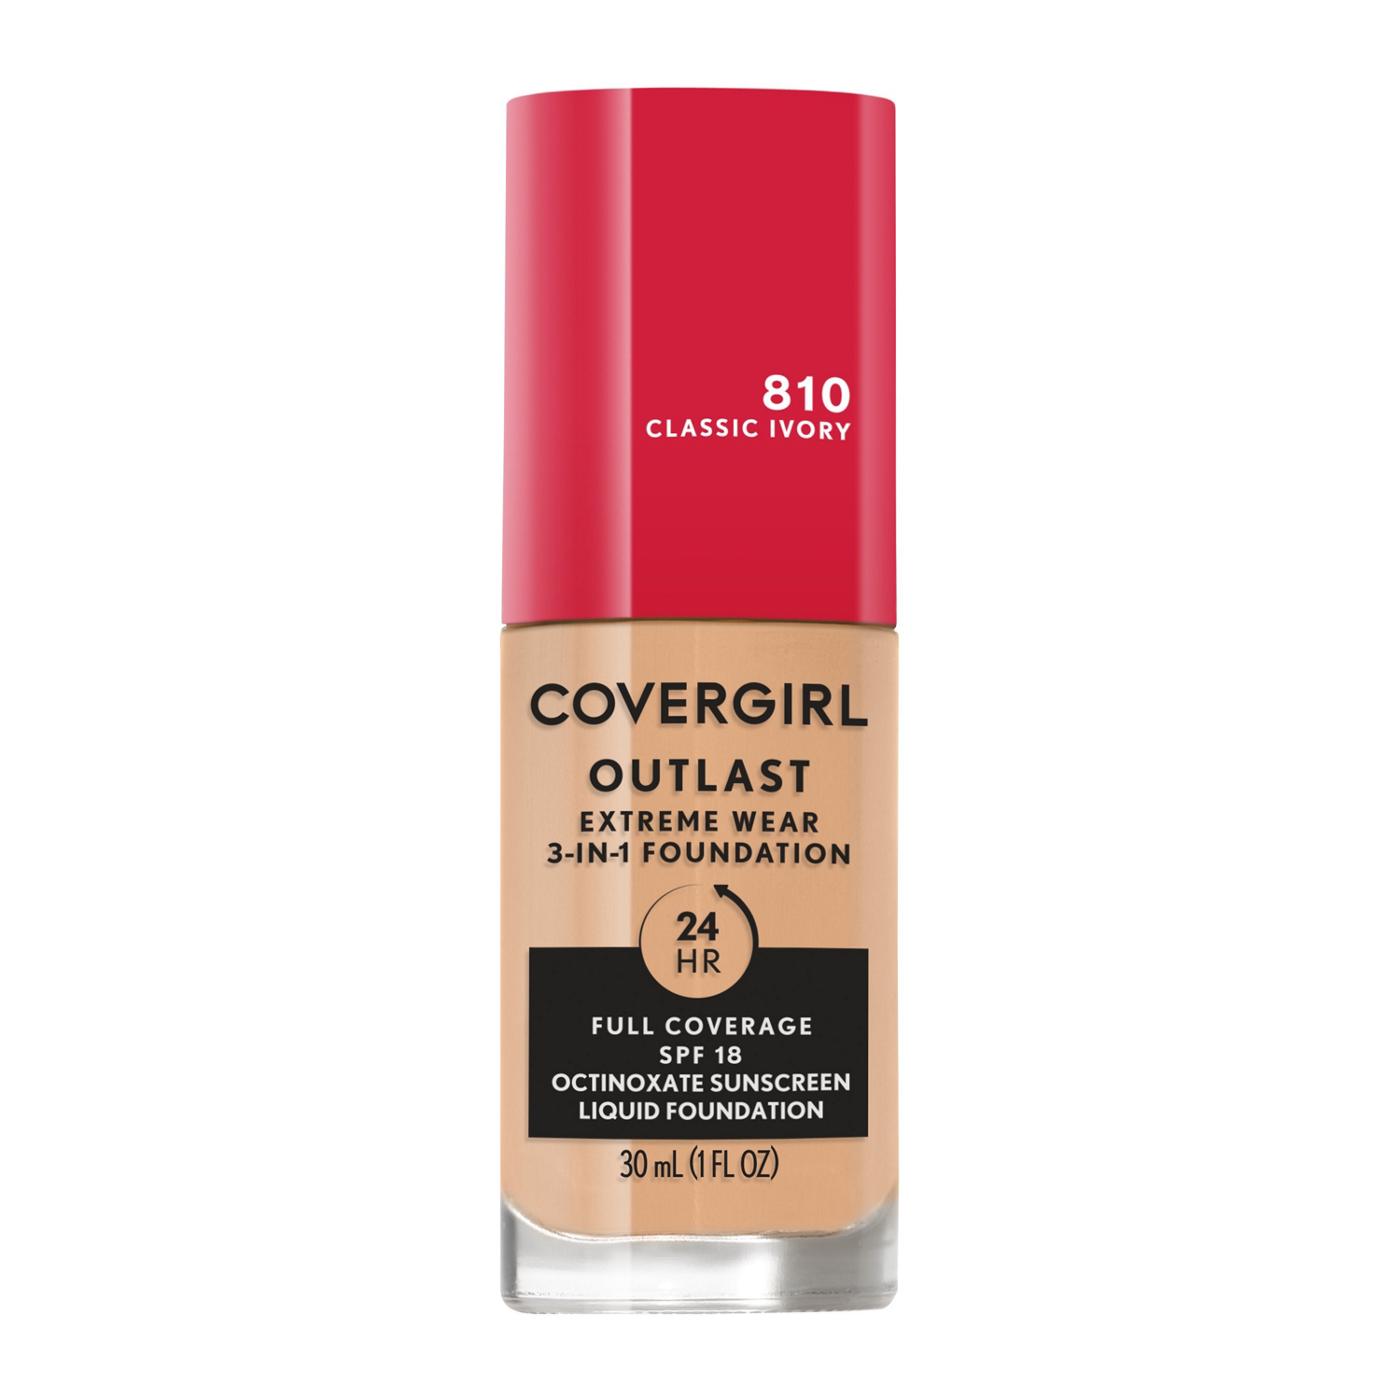 Covergirl Outlast Extreme Wear Liquid Foundation 810 Classic Ivory; image 1 of 11